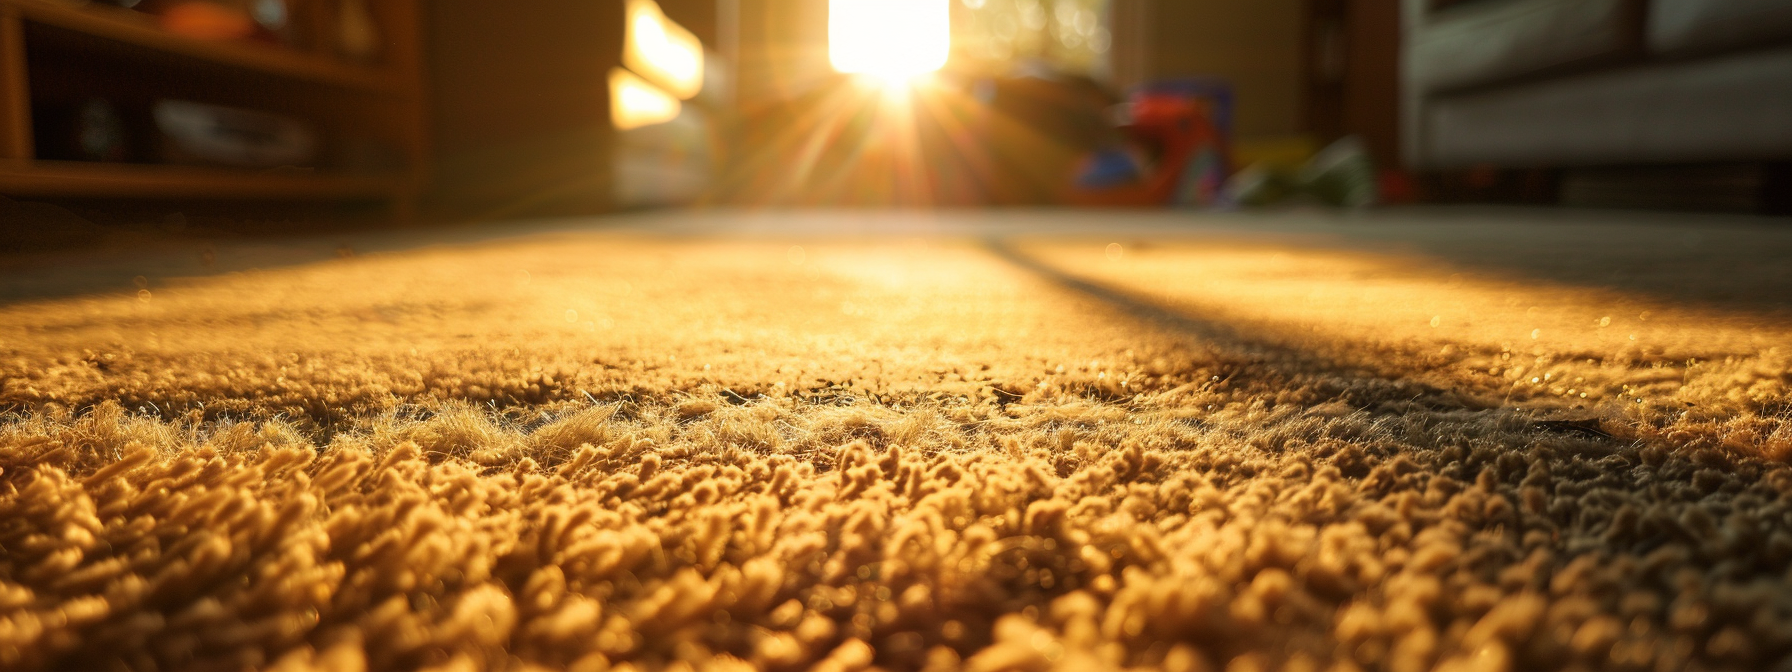 Daily Carpet Care: Simple Steps to Keep Your Carpets Looking New